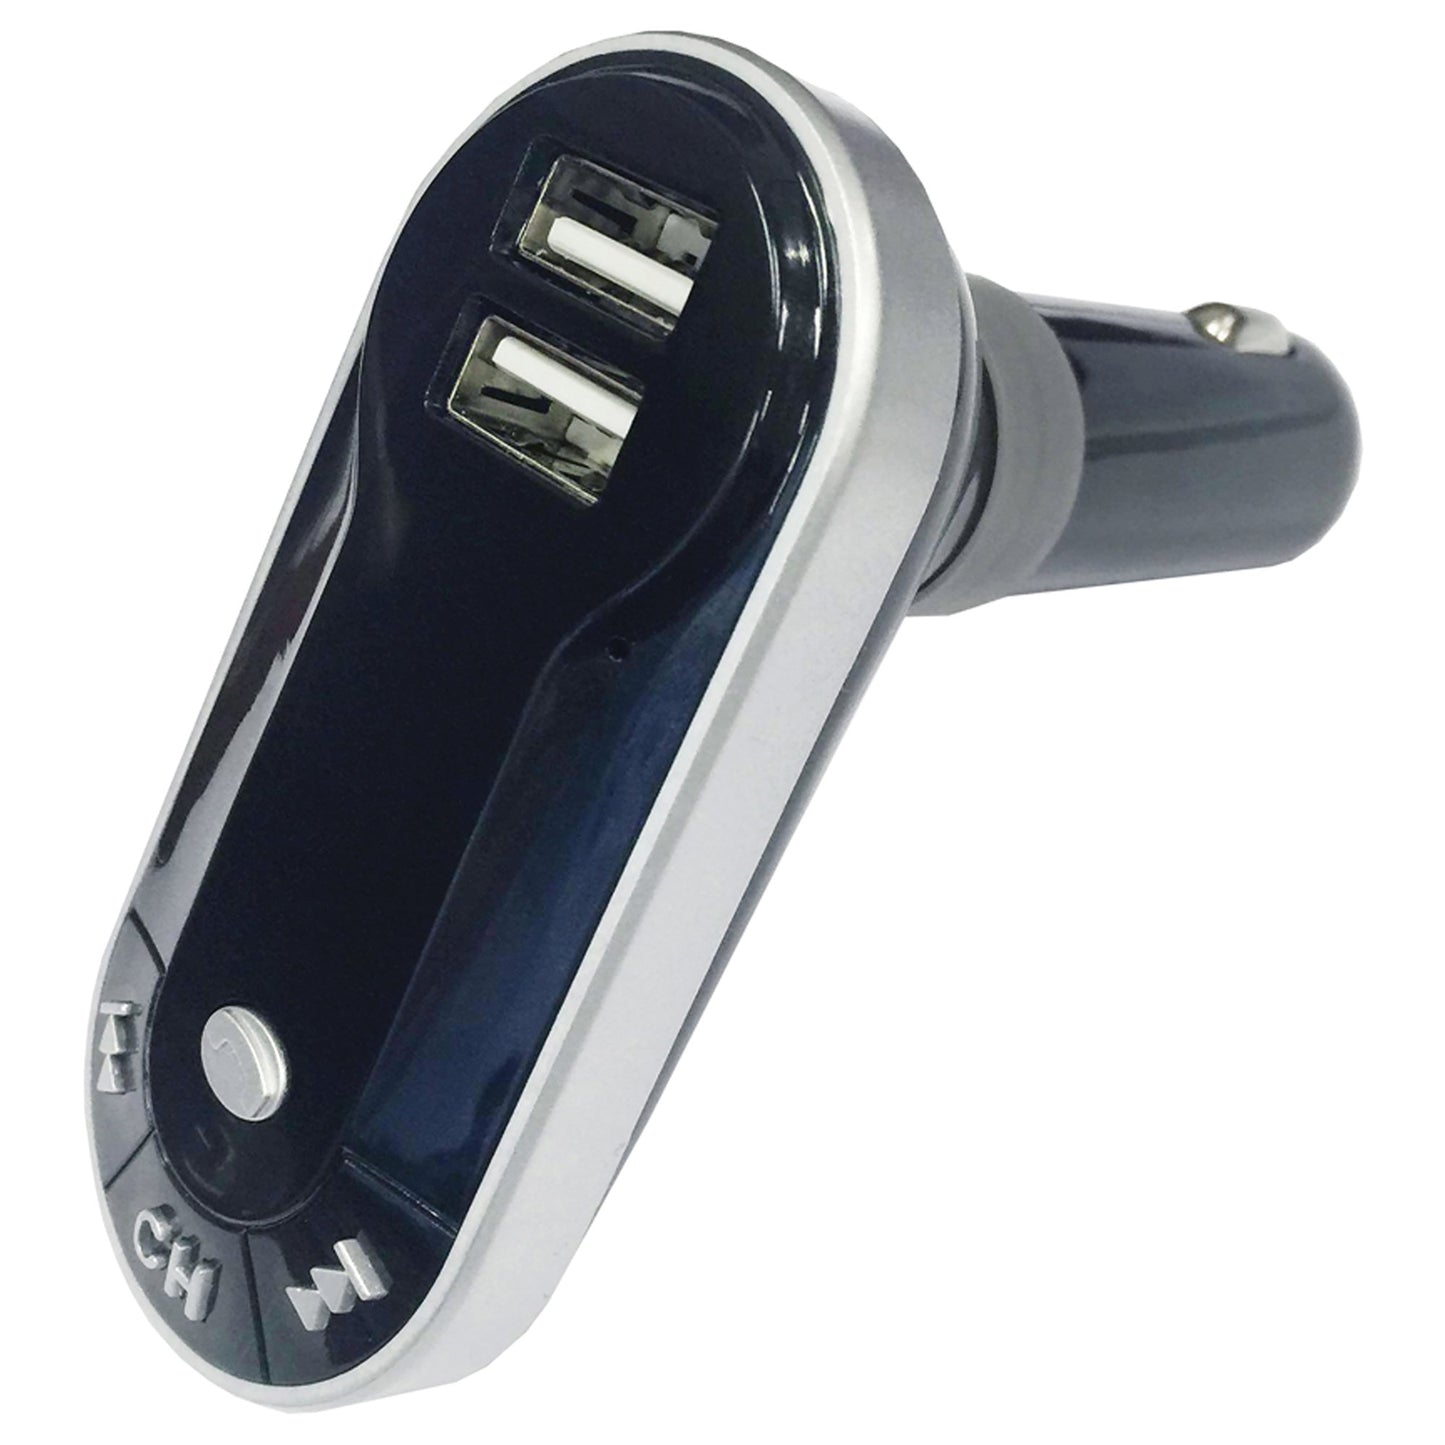 Naxa NA-3032 Bluetooth® FM Transmitter with MP3 Player and USB Charging